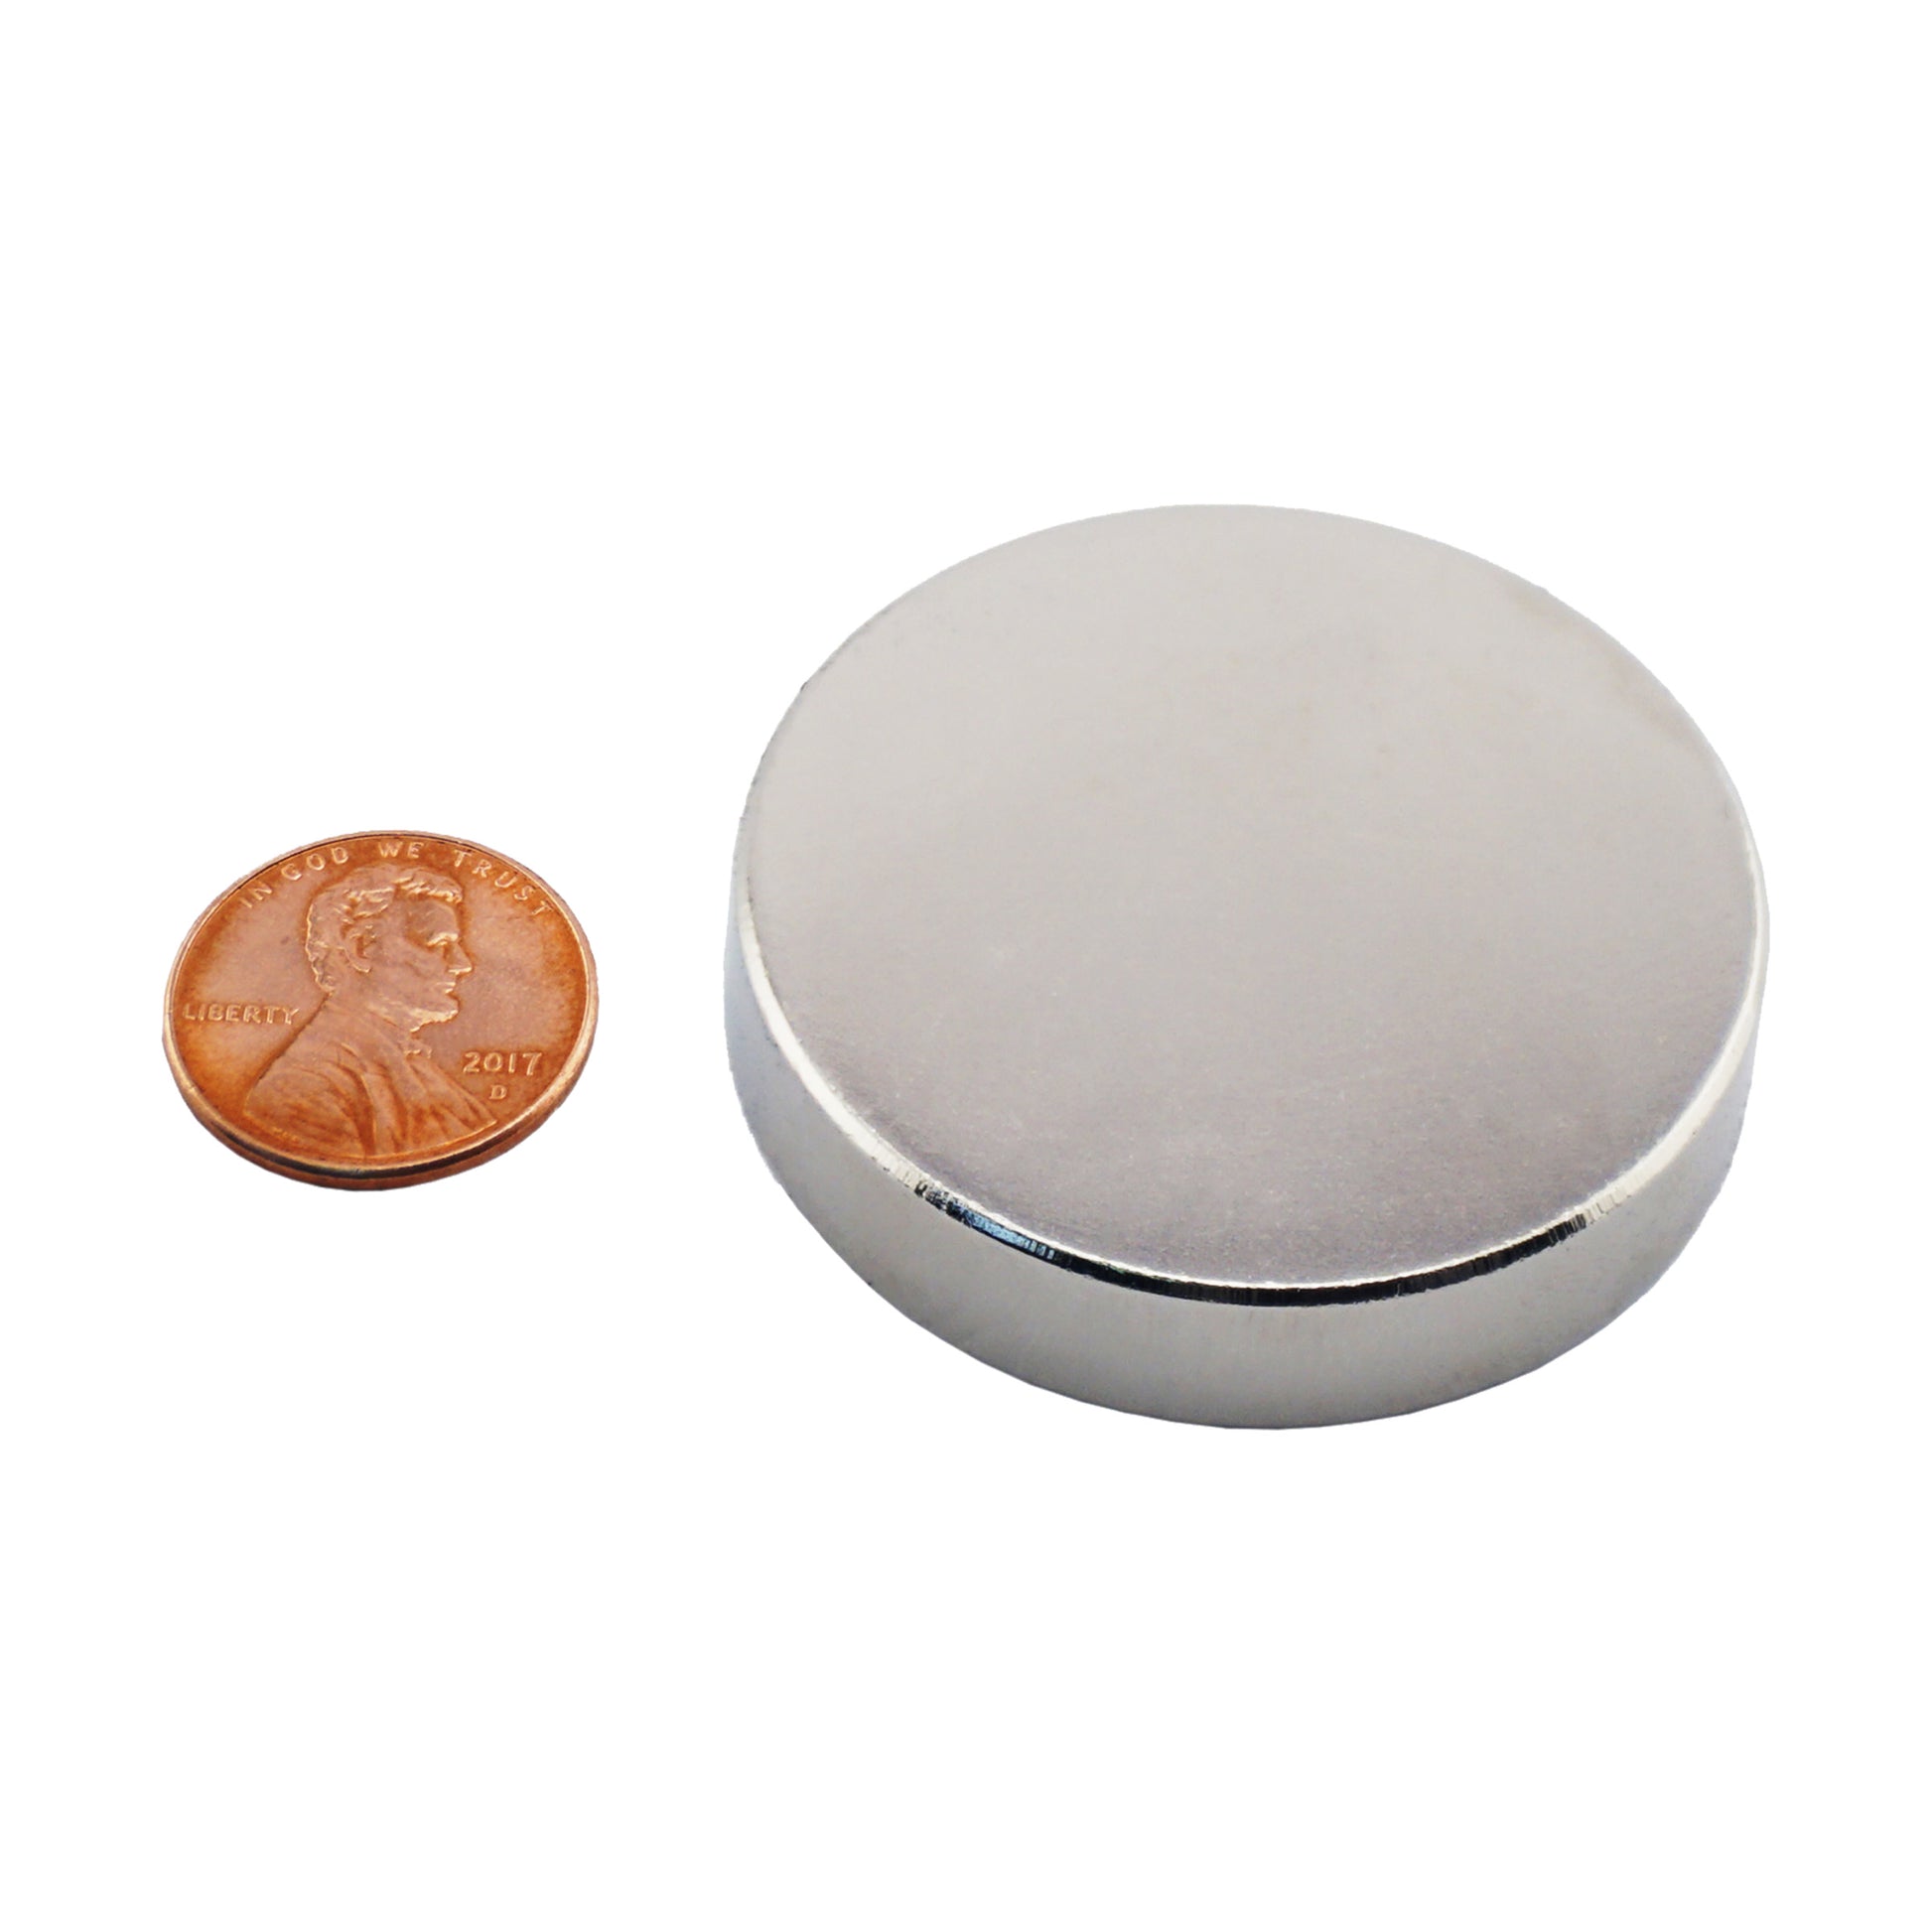 Load image into Gallery viewer, ND017503N Neodymium Disc Magnet - Compared to Penny for Size Reference